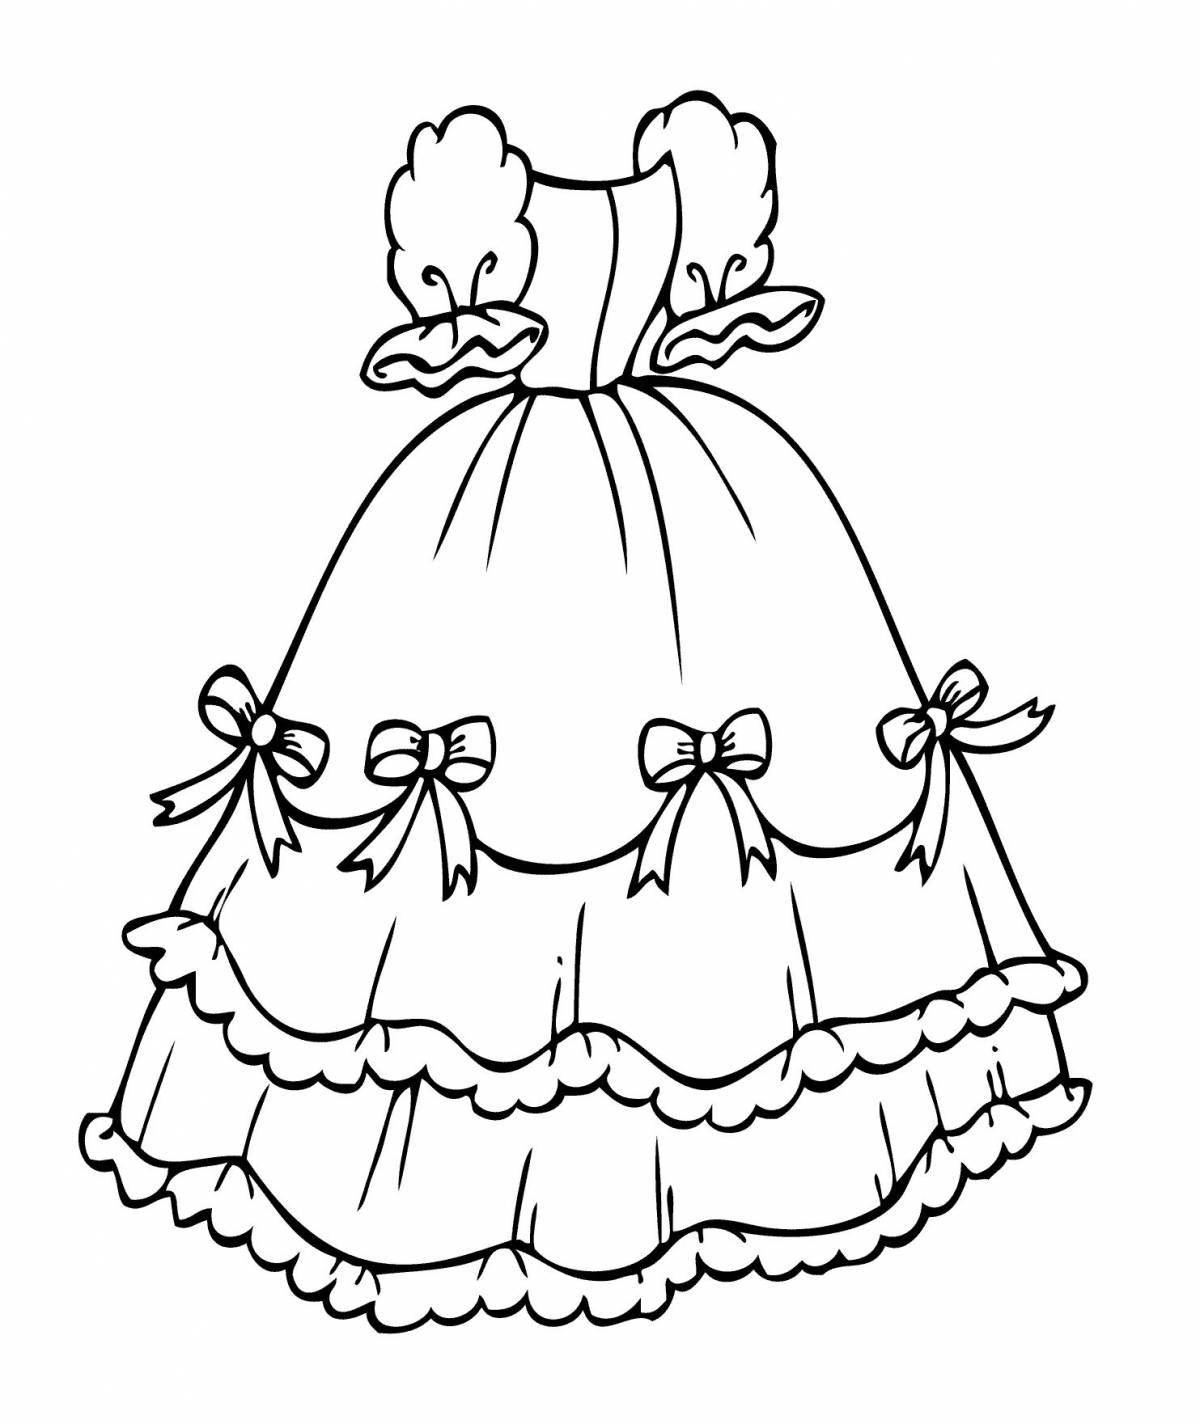 Coloring page charming doll dress for children 4-5 years old